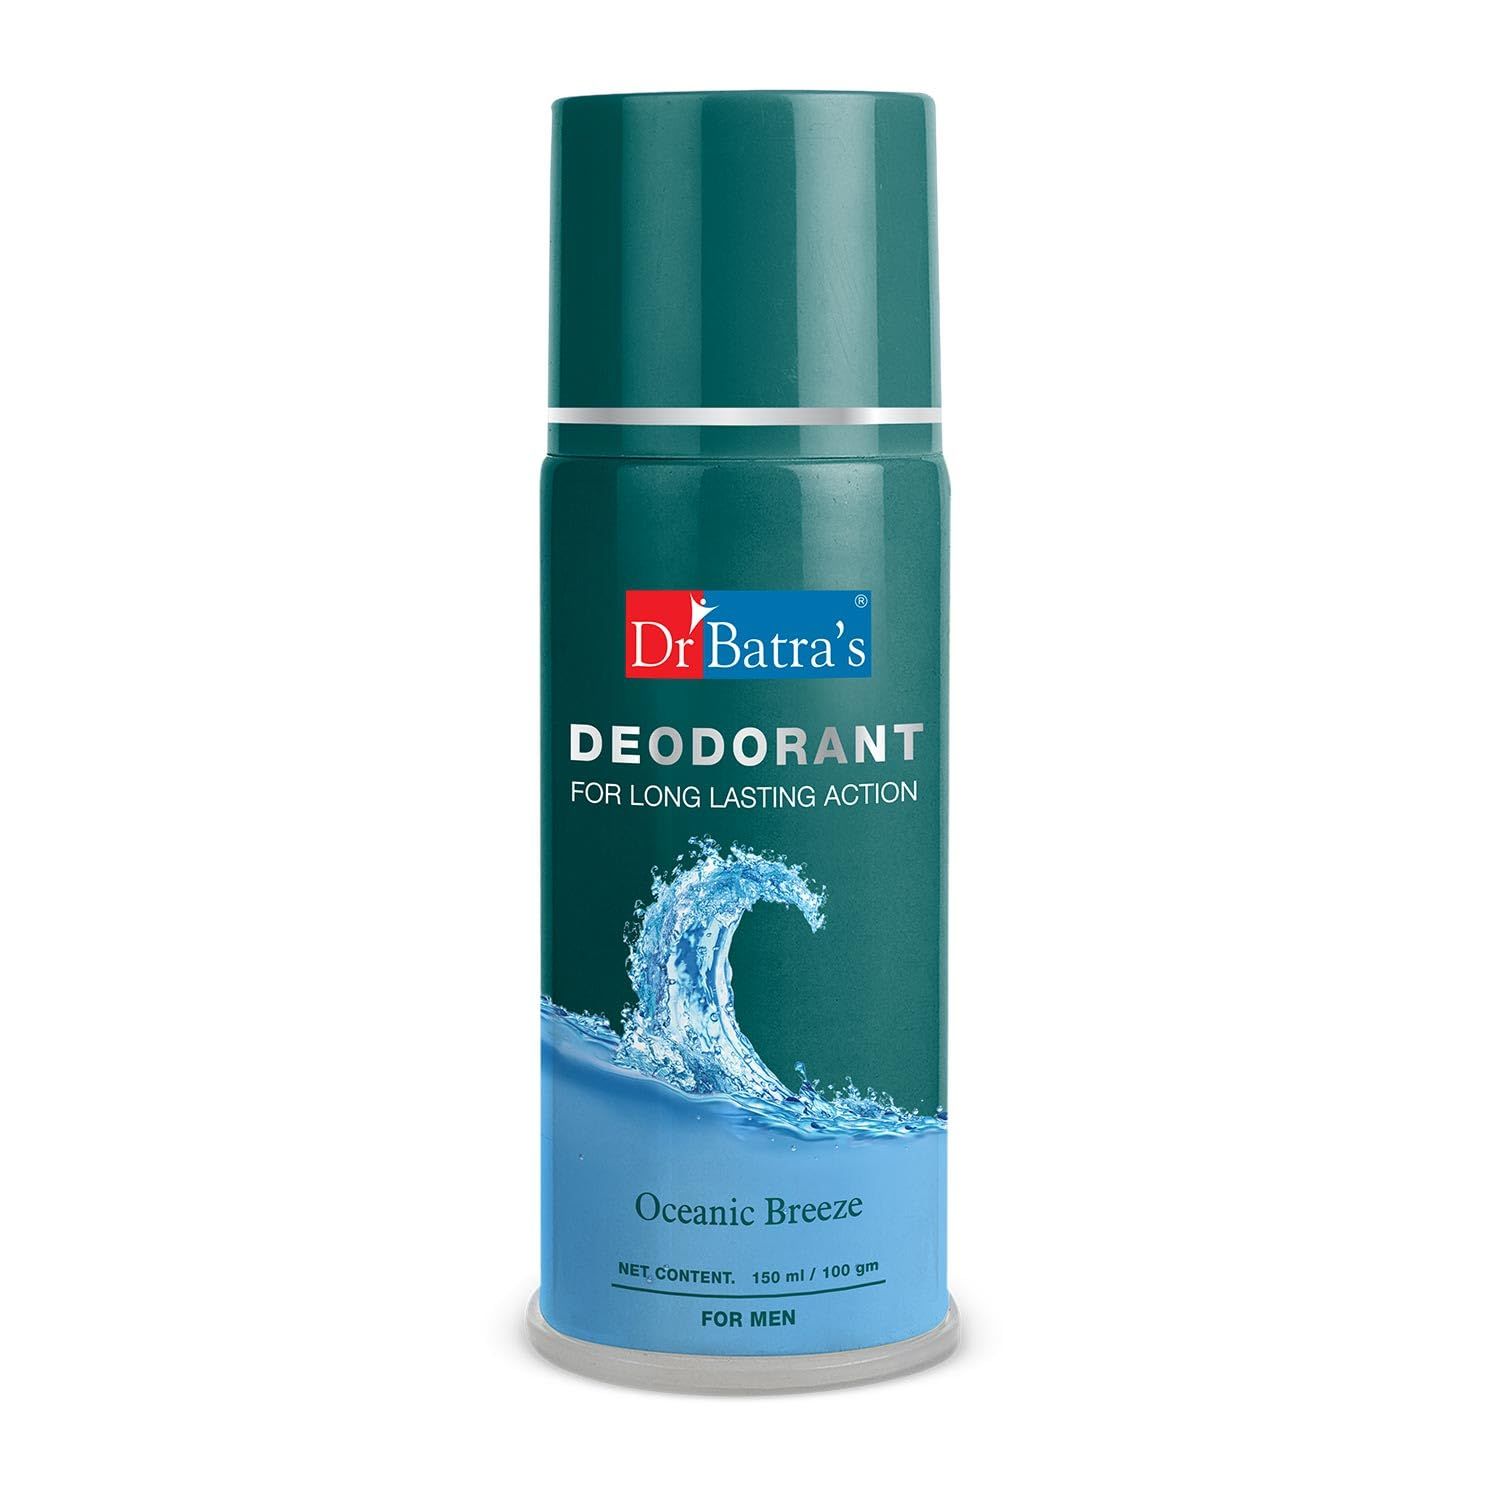 Dr Batra's Deodarant With Long Lasting Action Oceanic Breeze